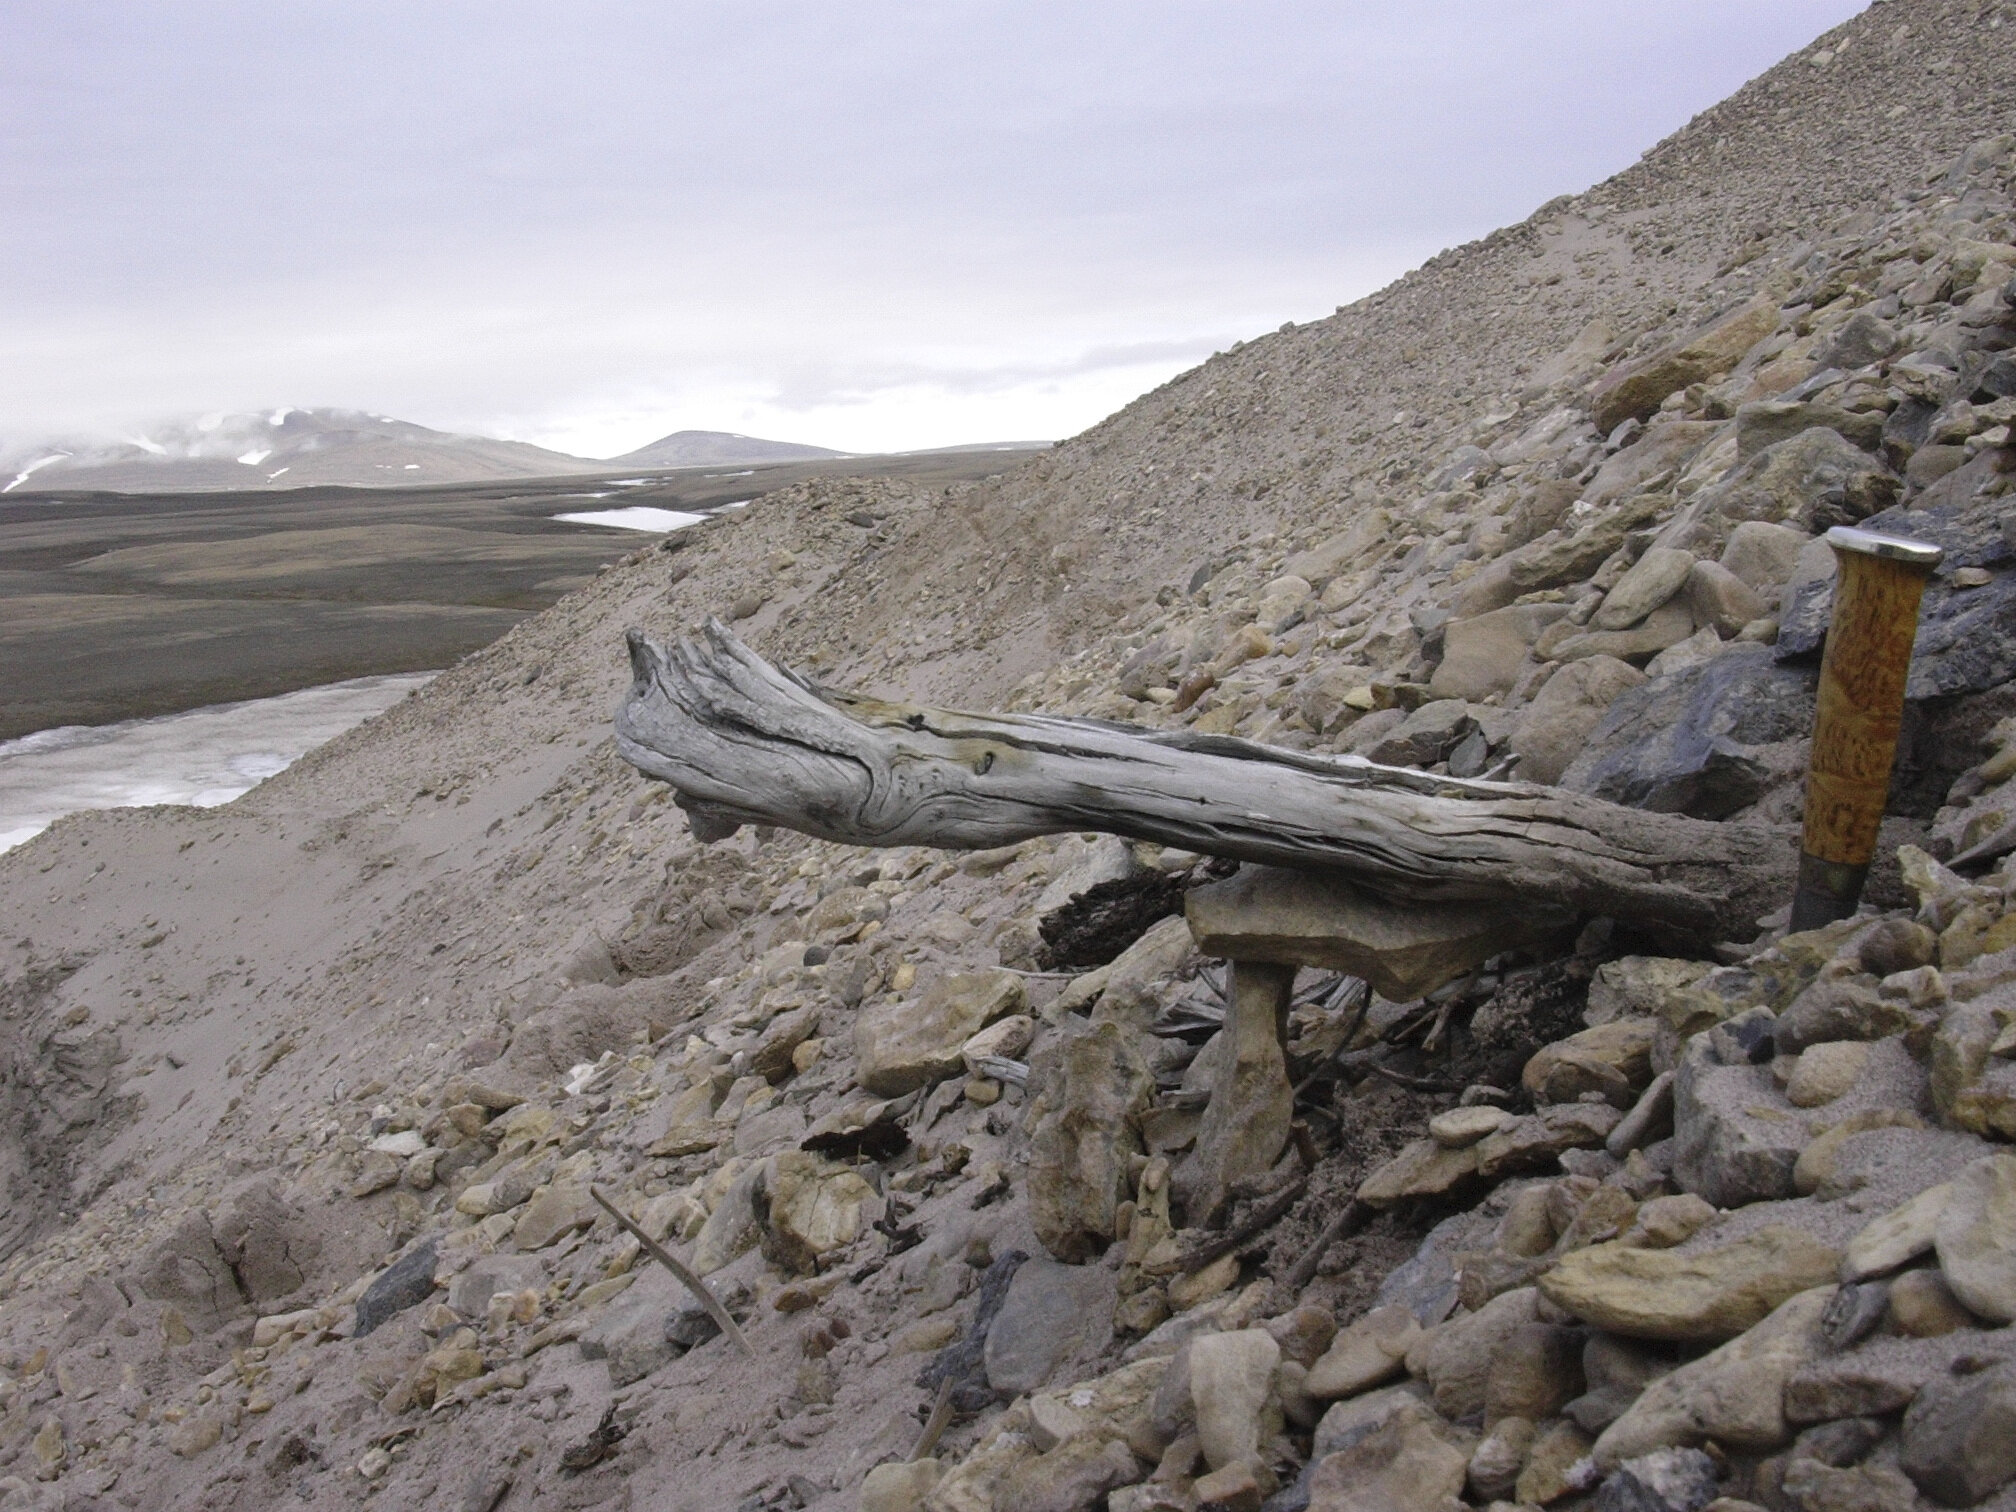 #Oldest DNA reveals life in Greenland two million years ago